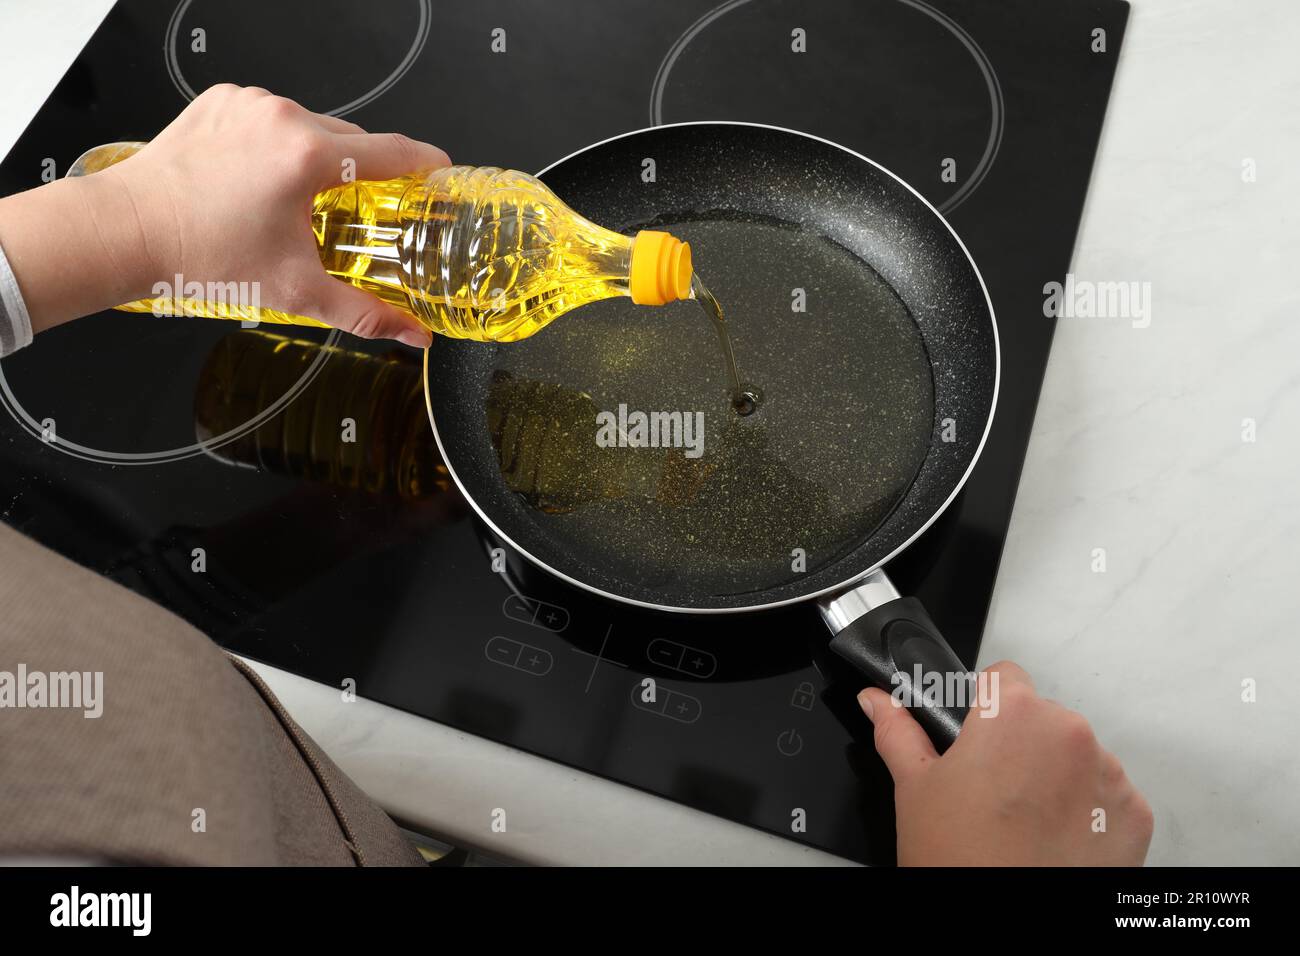 Woman pouring cooking oil from bottle into frying pan on stove, above view Stock Photo